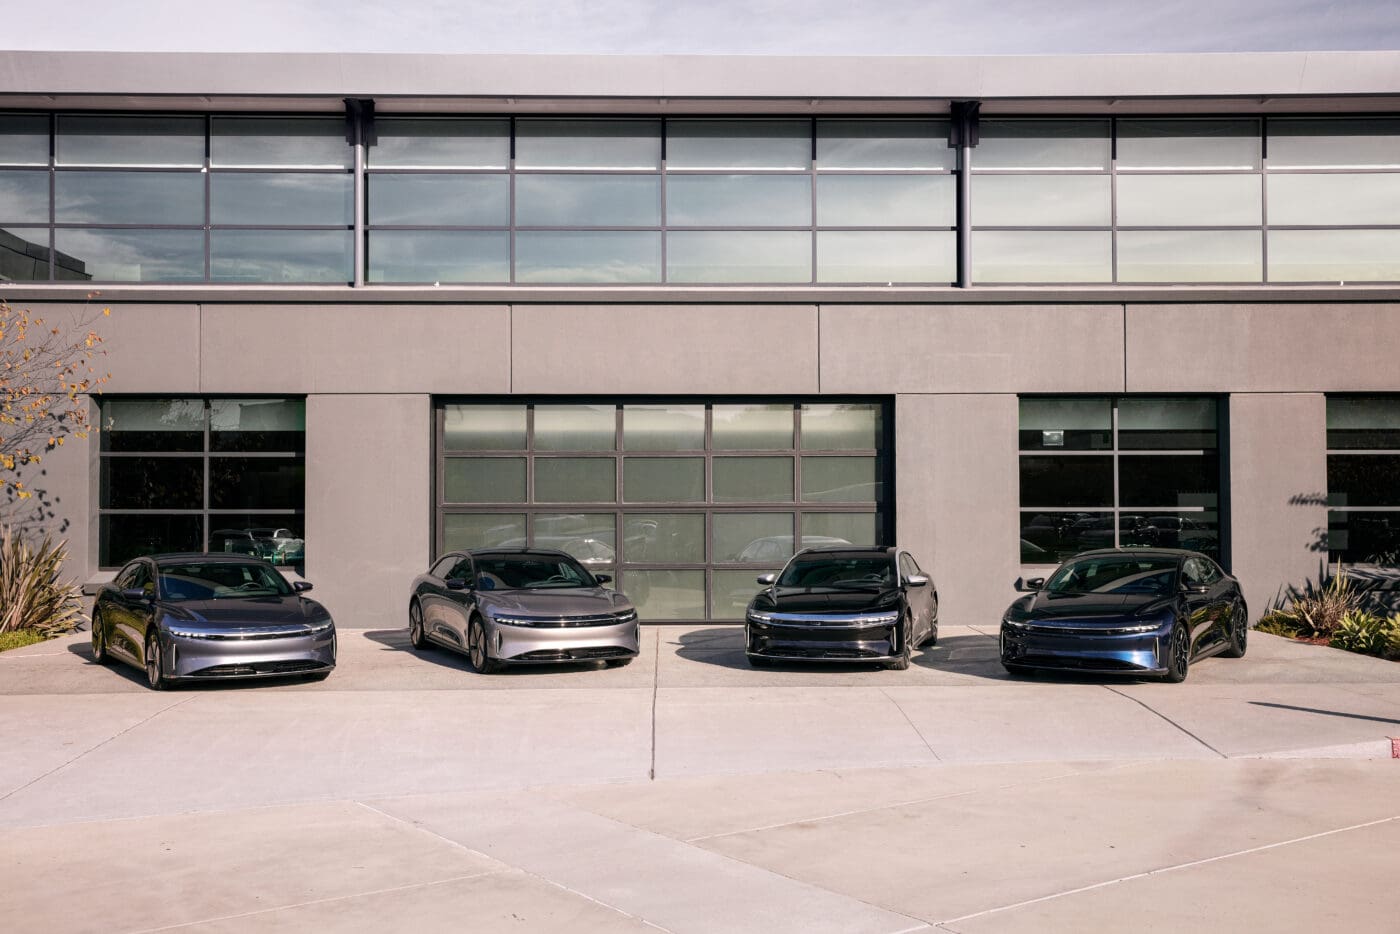 An image of four Lucid Air Sedans parked outdoors.